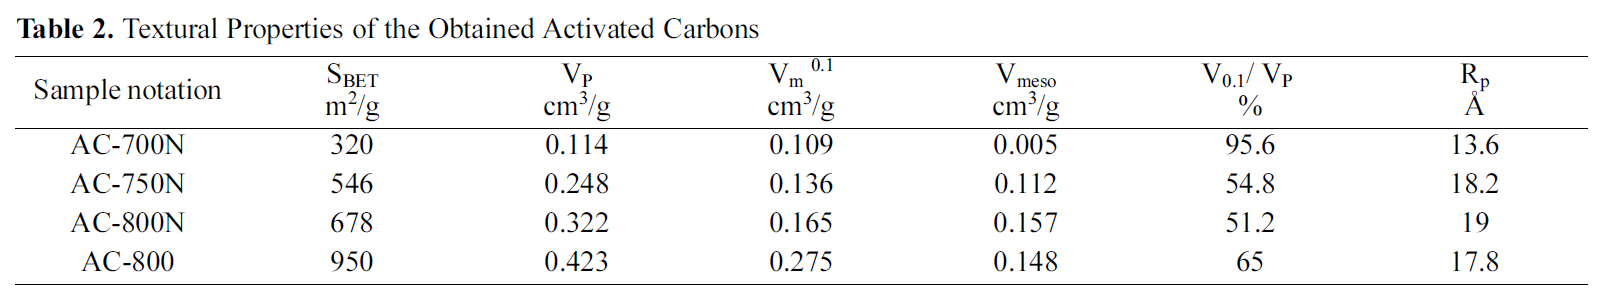 Textural Properties of the Obtained Activated Carbons